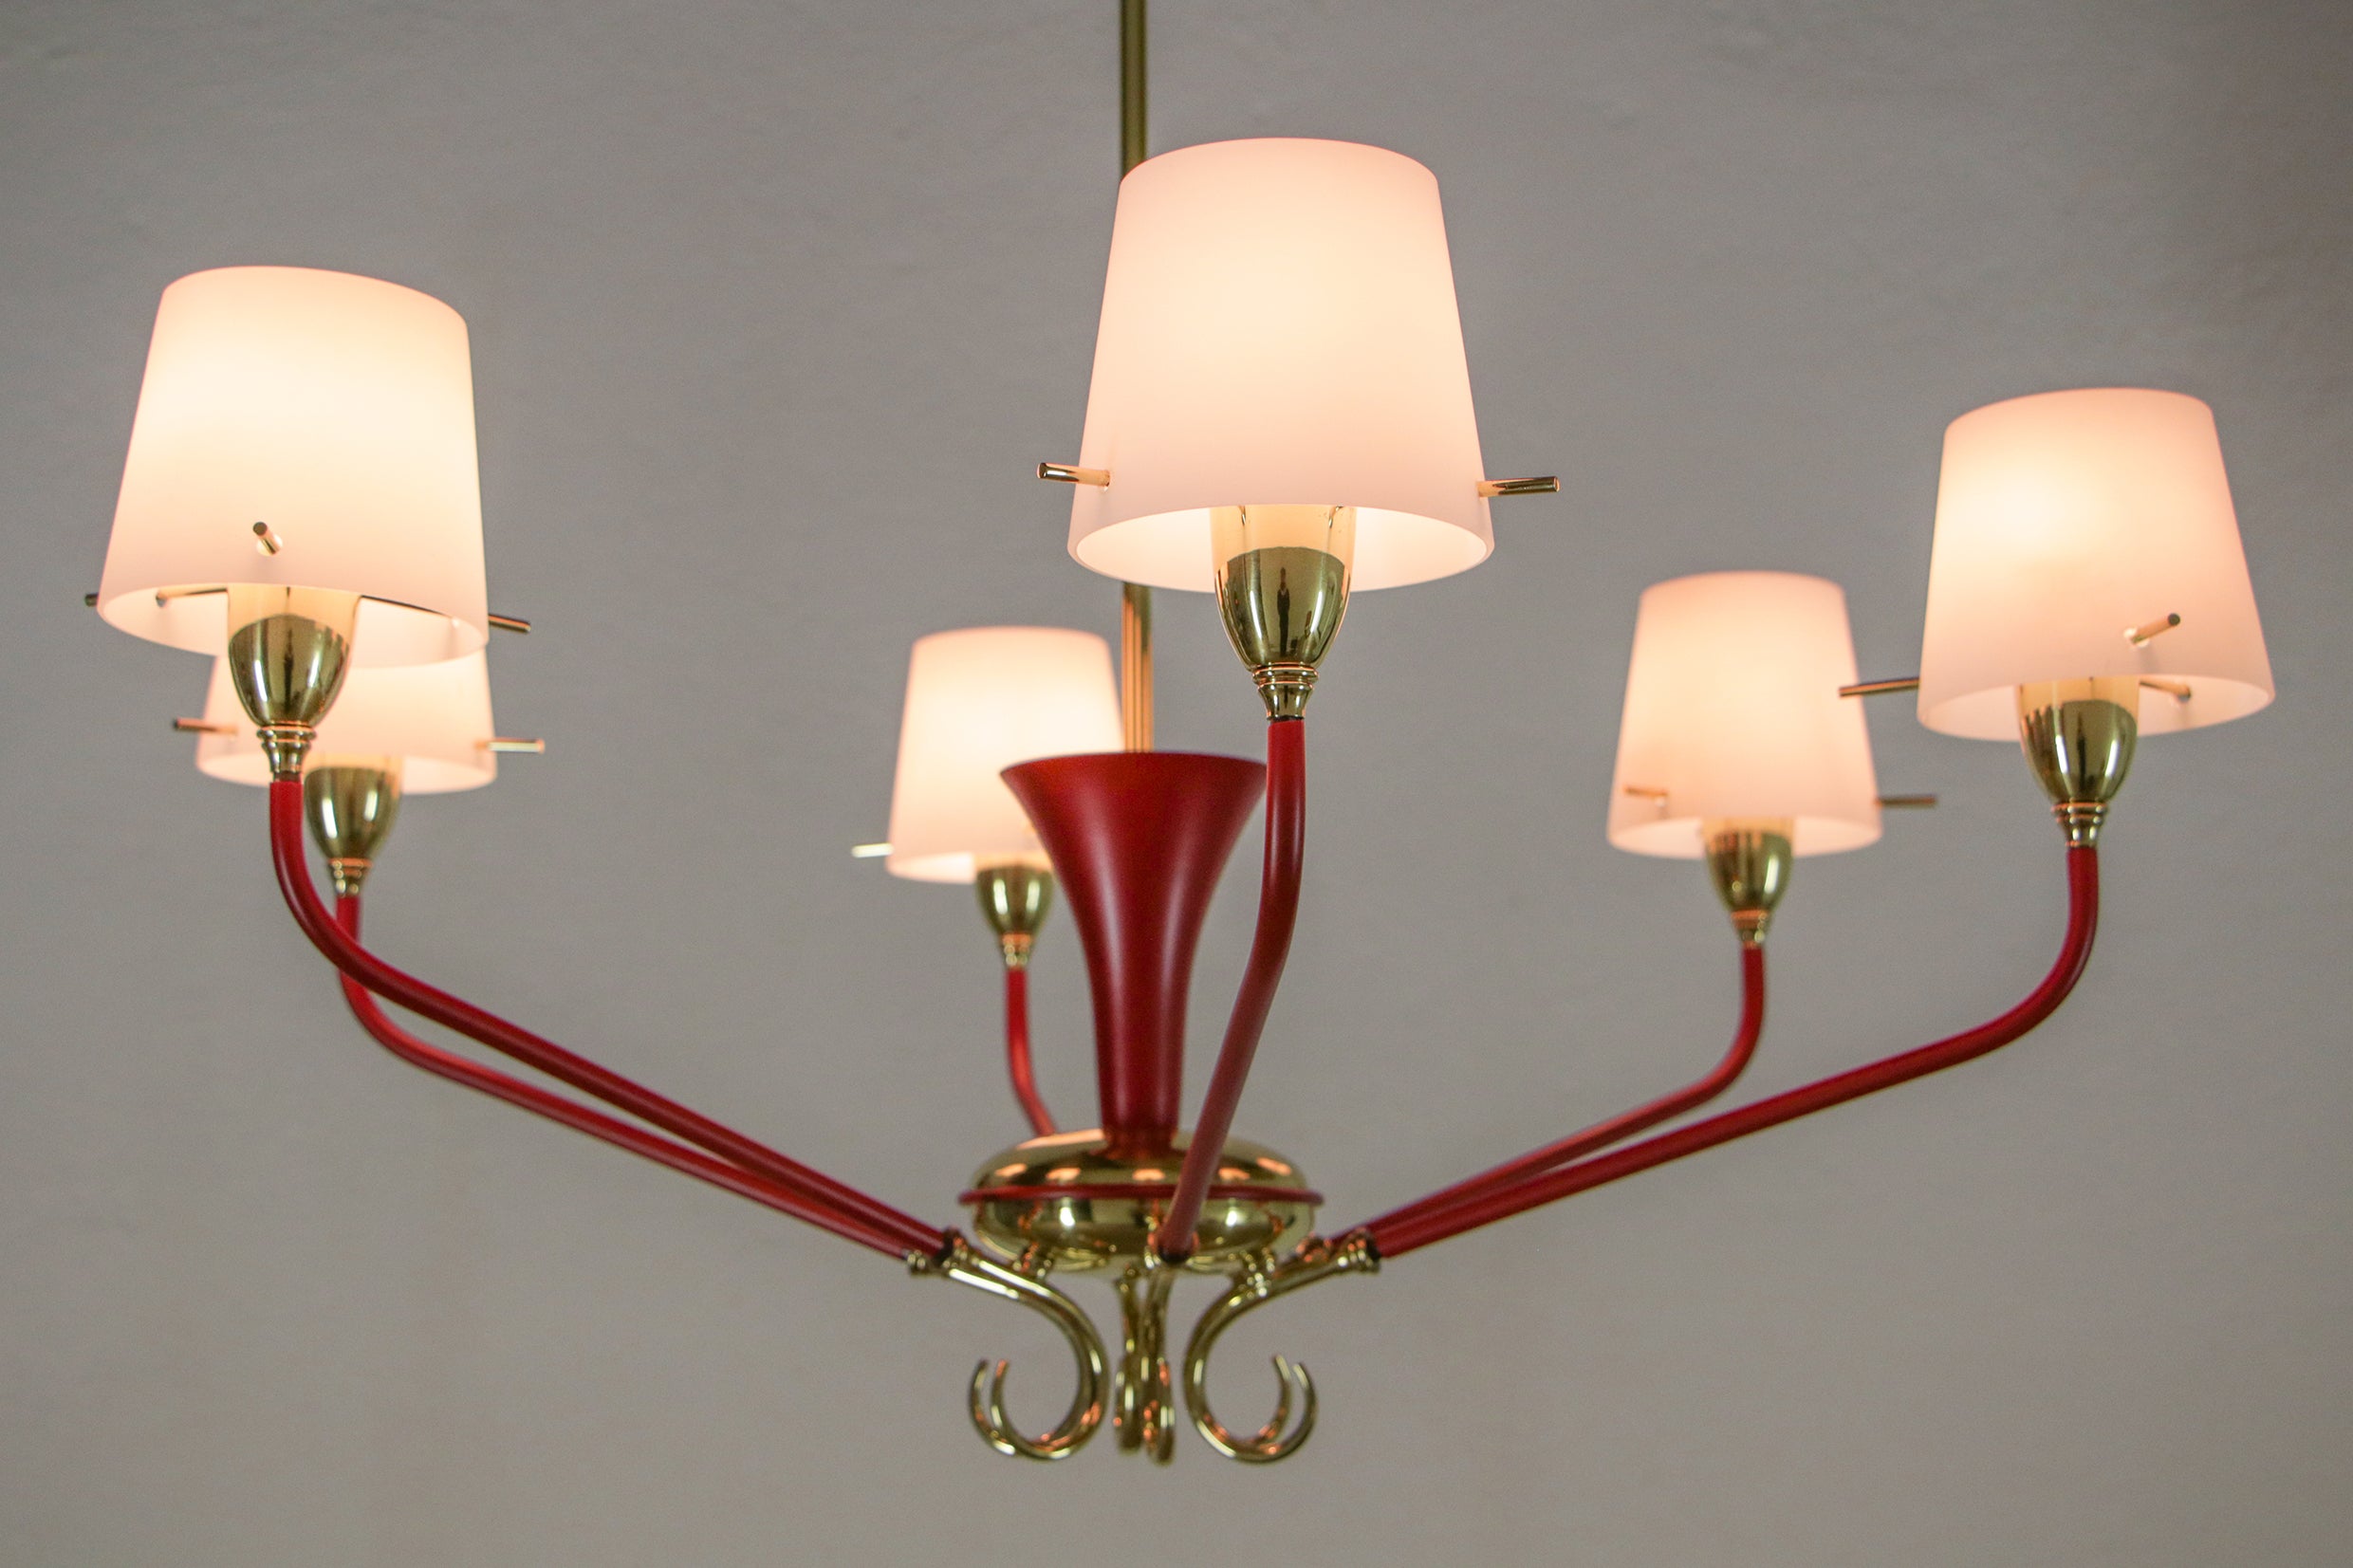 Wonderful Italian Mid-Century Modern chandelier with six lights attributed to Stilnovo design, from the 1950s. Structure in polished brass, satin glass, and red color aluminum. A specialized artisan made with great care the restoration of this